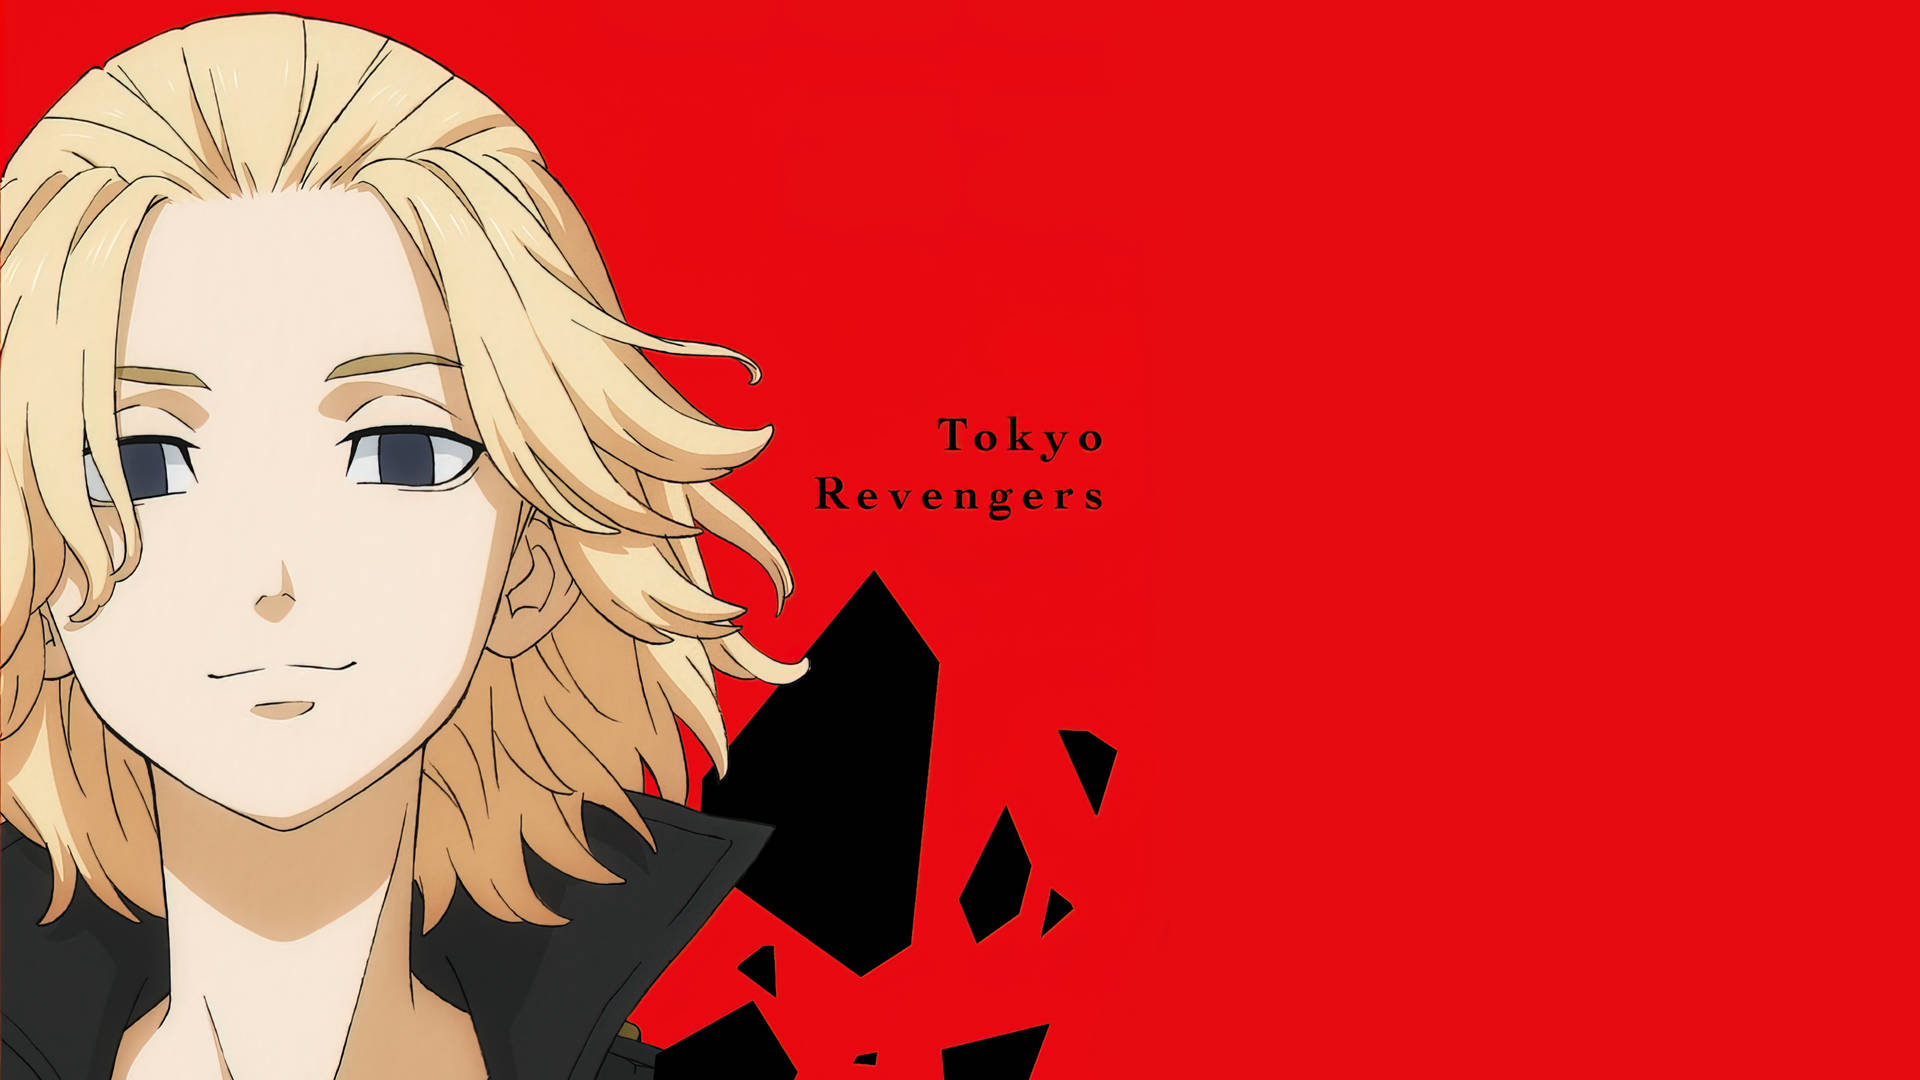 Mikey Tokyo Revengers Red Poster Background